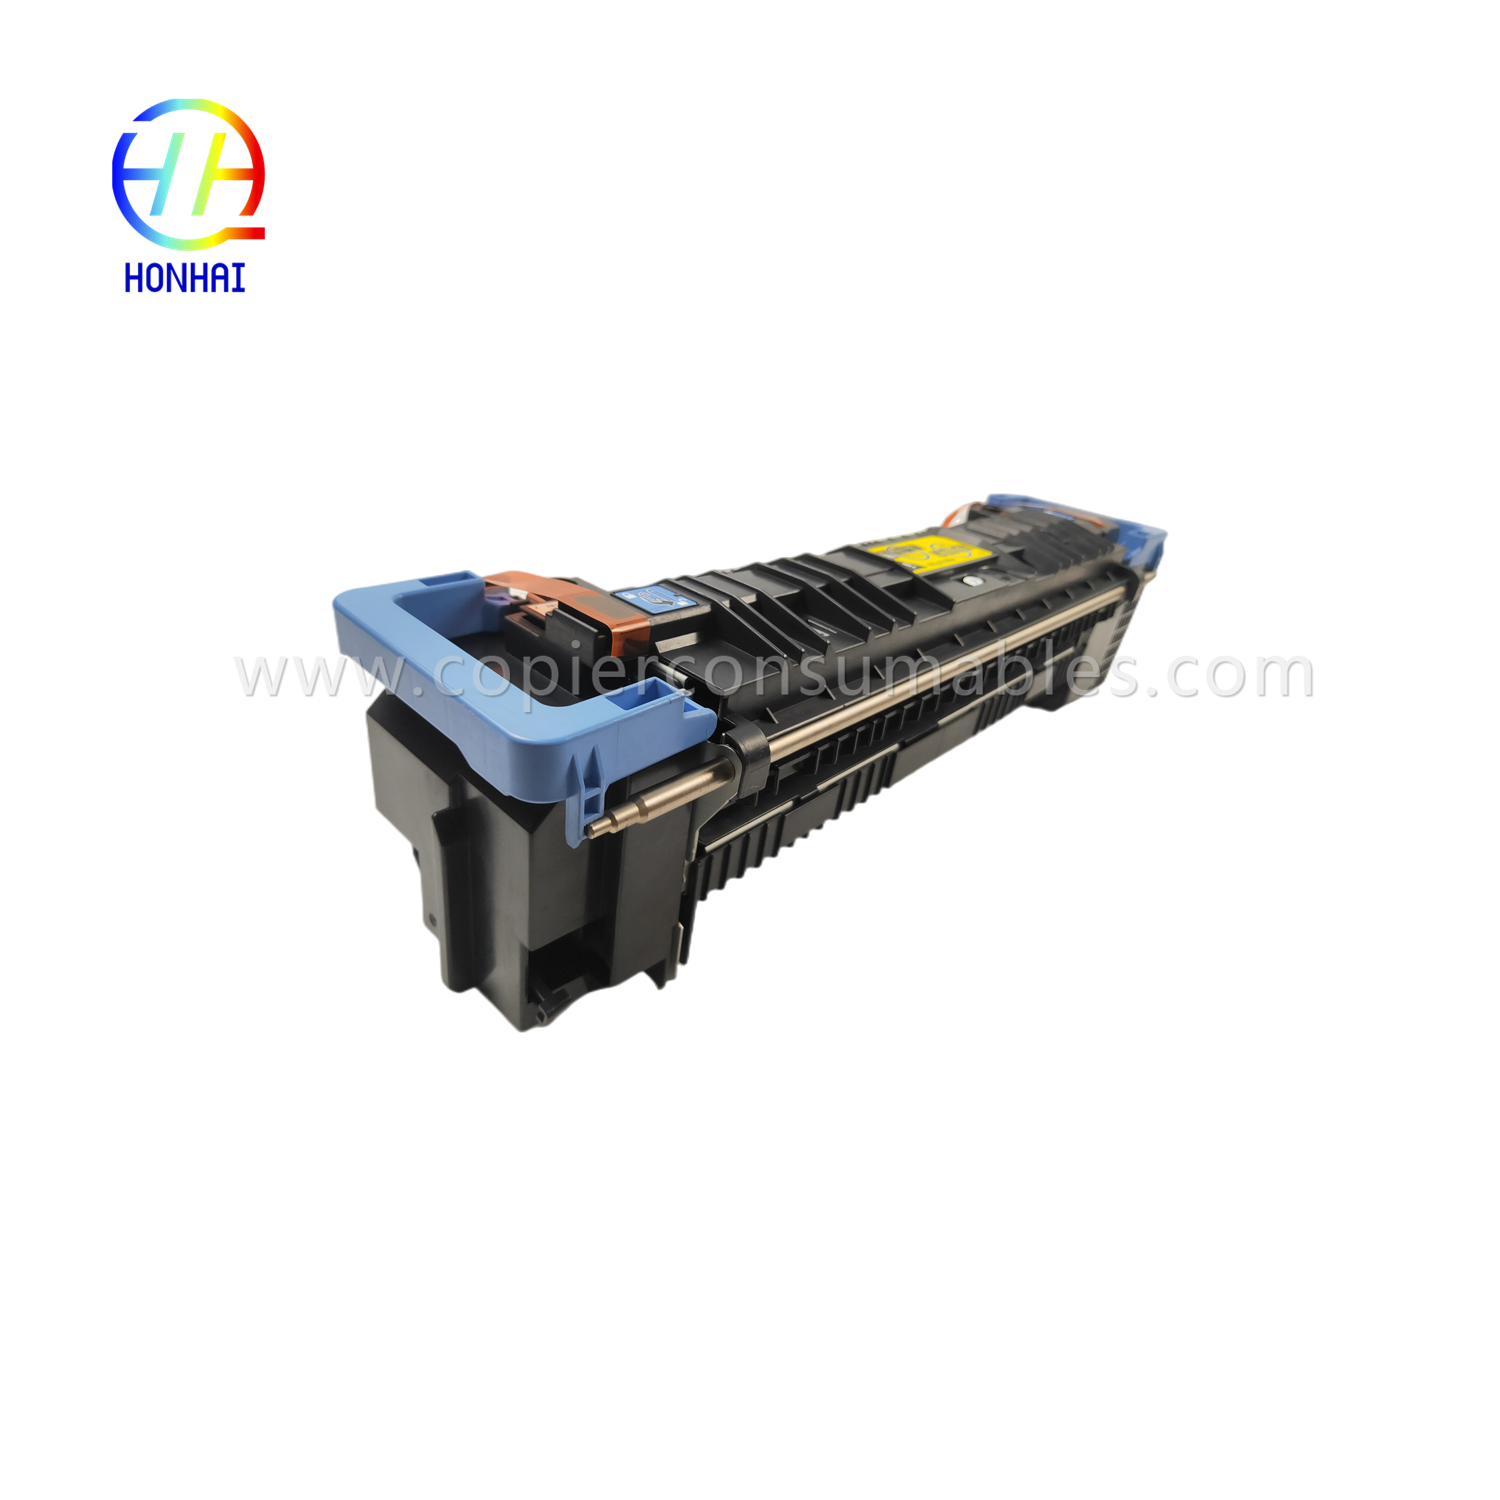 https://www.copierconsumables.com/fuser-assembly-unit-for-hp-m855-m880-m855dn-m855xh-m880z-m880z-c1n54-67901-c1n58-67901-fising-heating-fising-